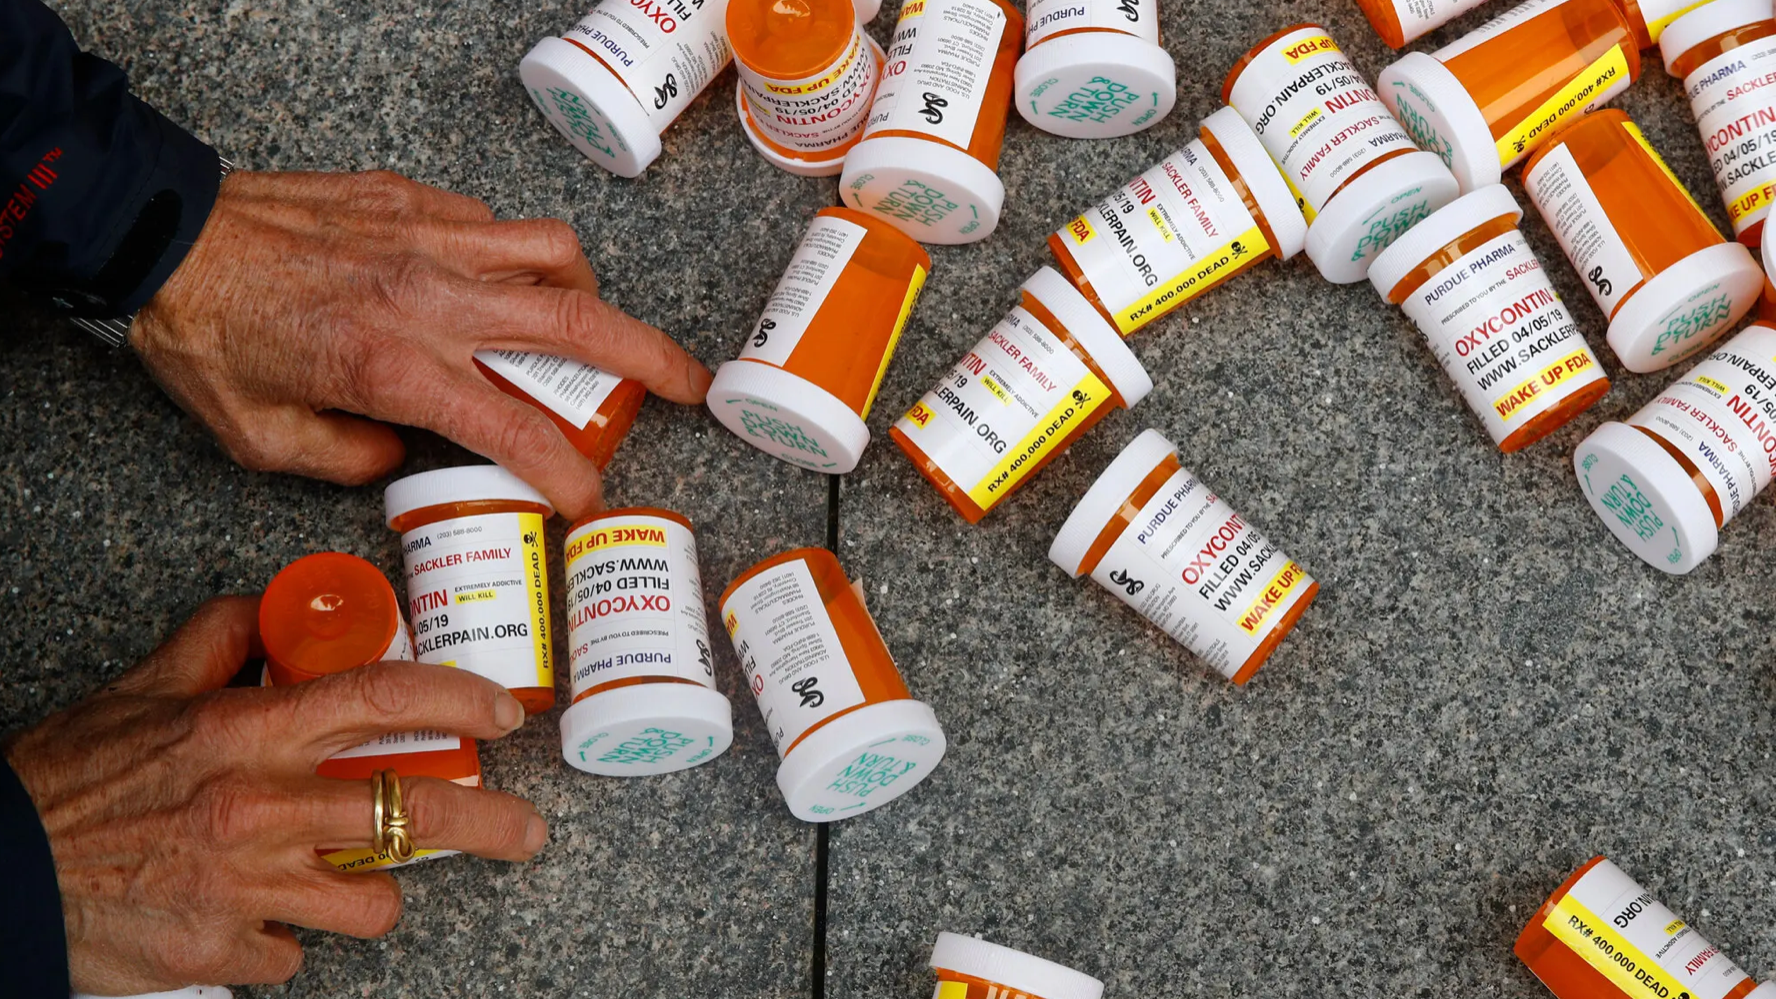 Featured image for “New York Times: Companies Finalize $26 Billion Deal With States and Cities to End Opioid Lawsuits”